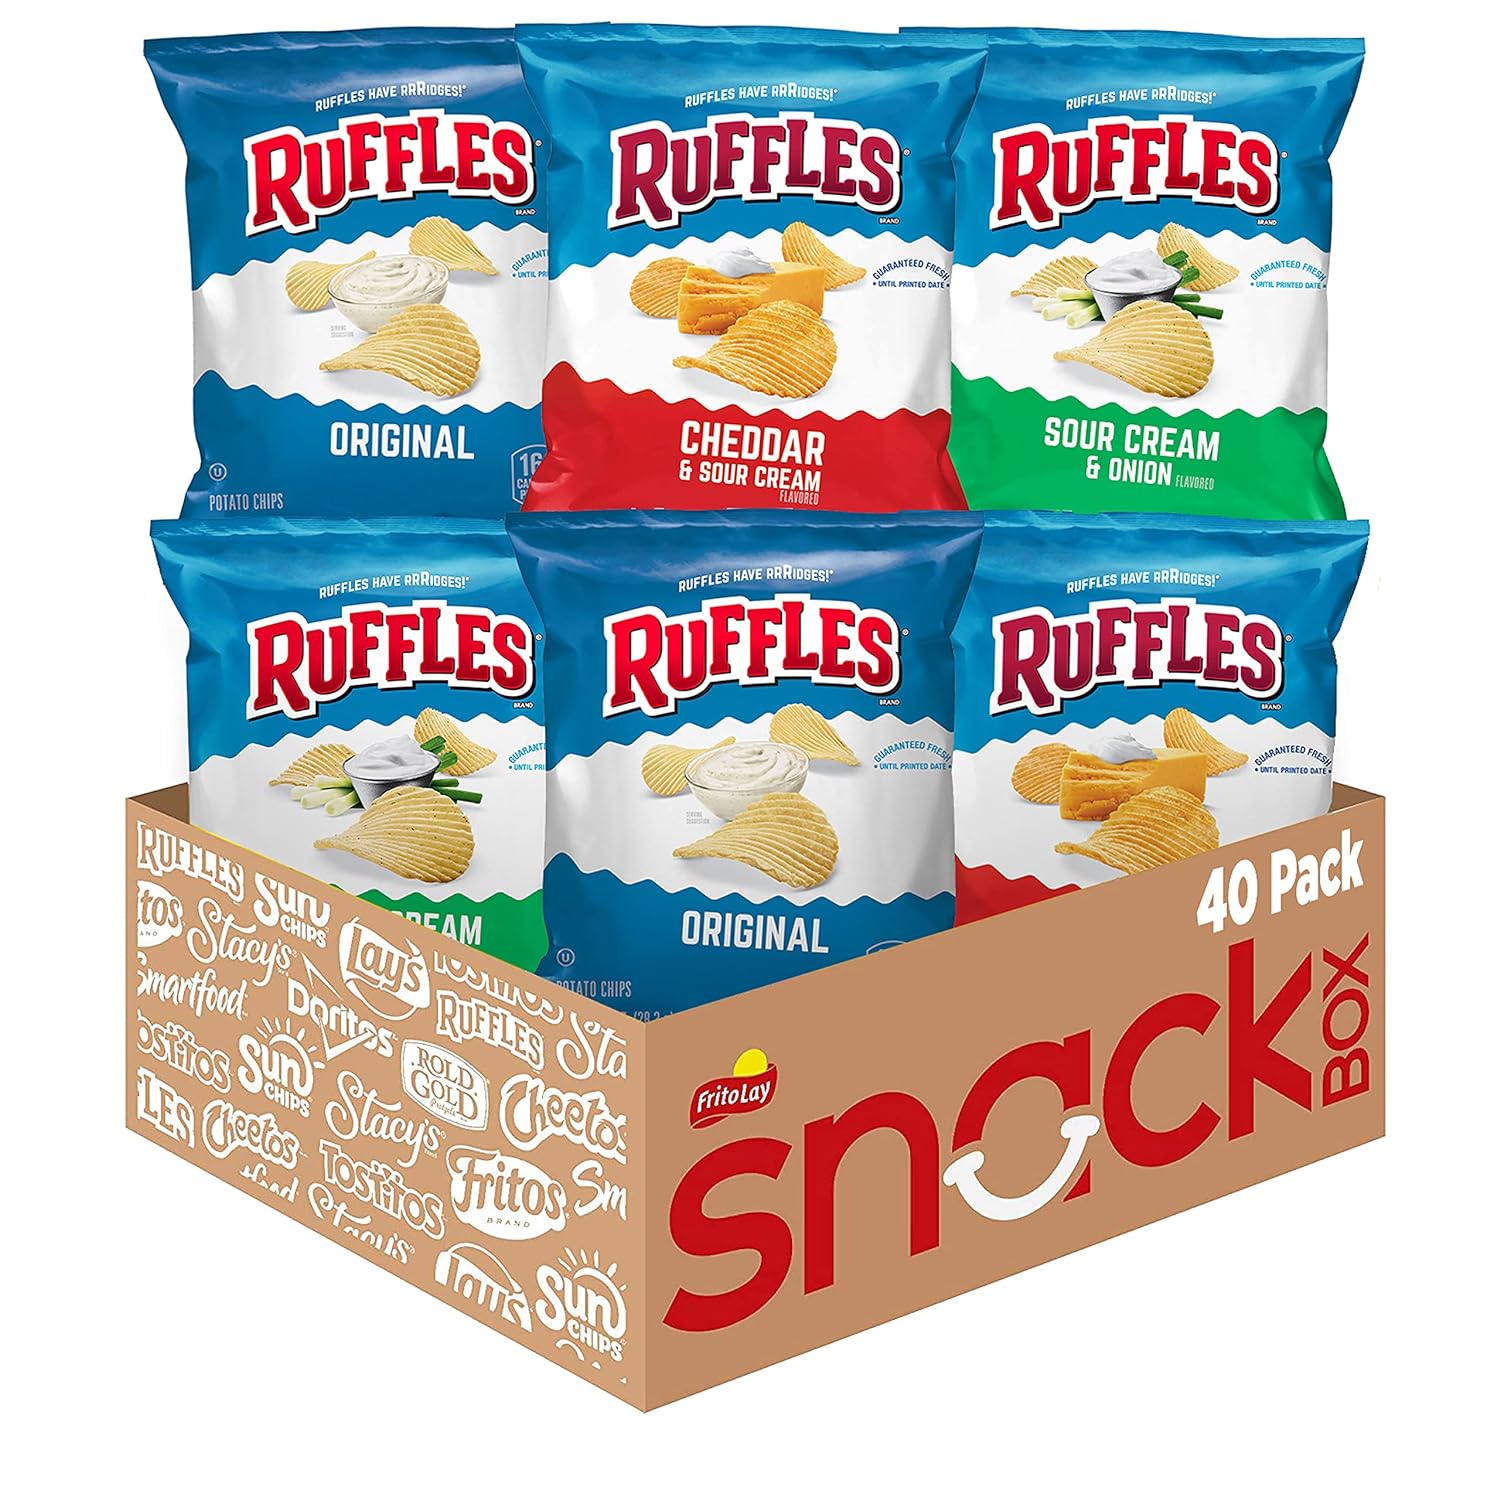 Very good condition and convenient for snacks. Love them. You sure get a lot for the price